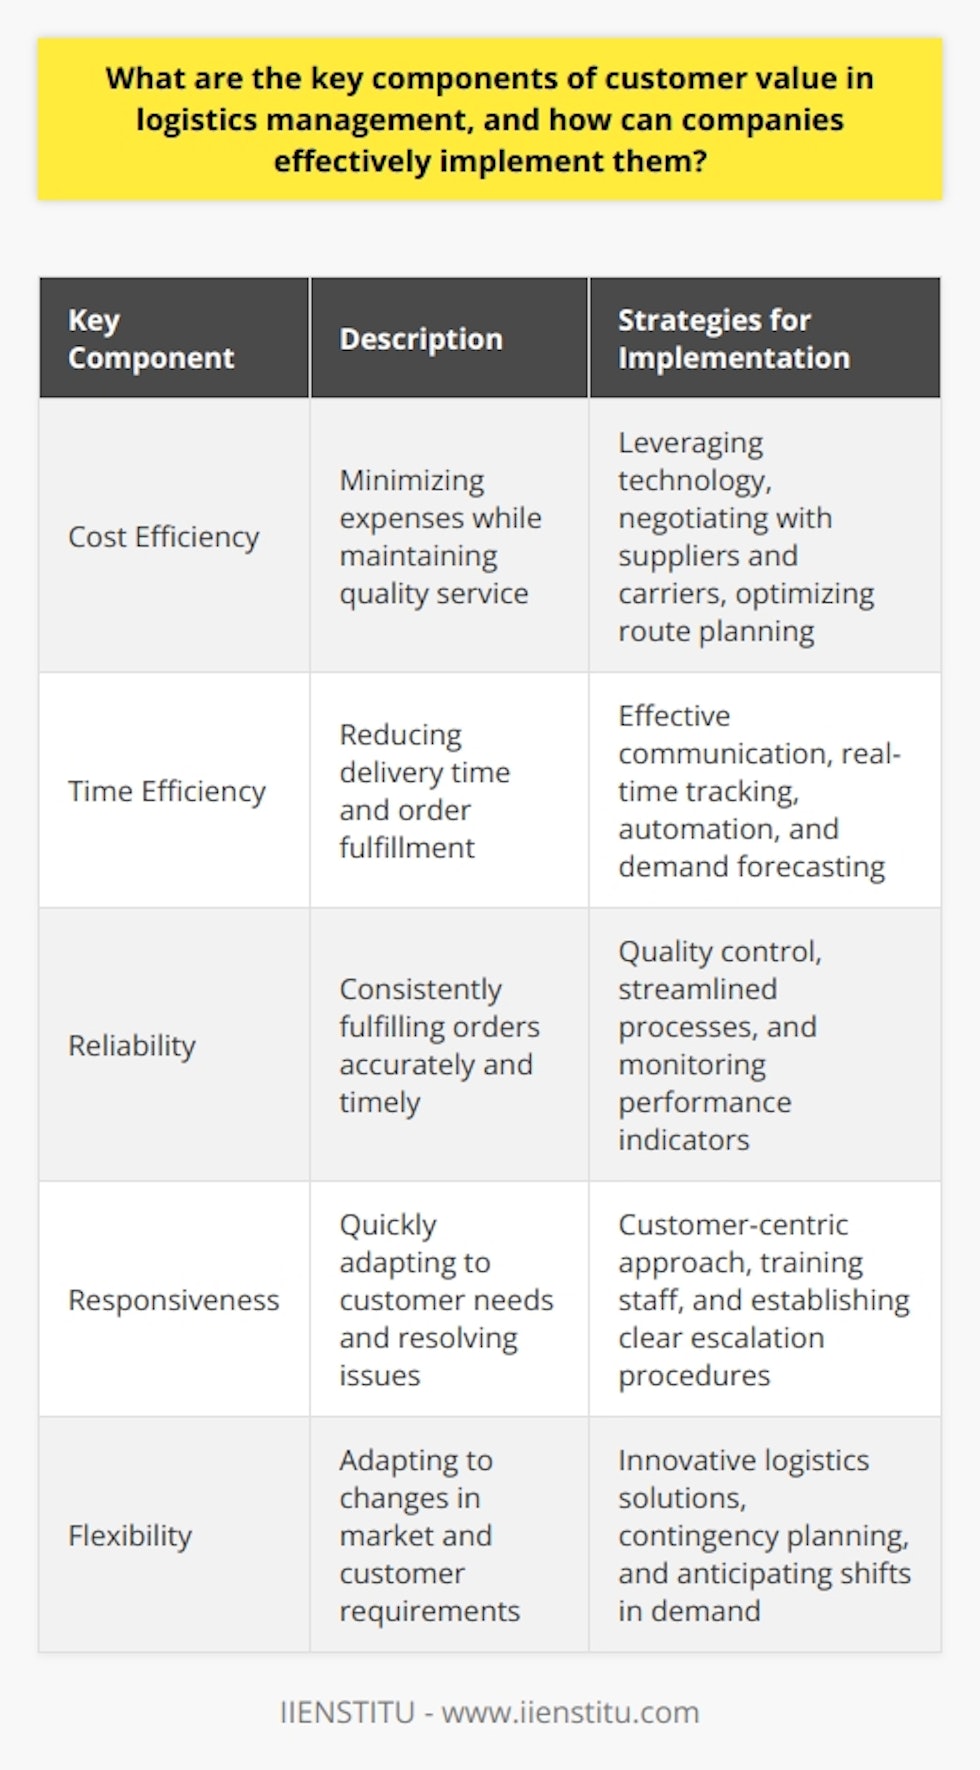 In summary, companies that prioritize the key components of customer value in logistics management—cost efficiency, time efficiency, reliability, responsiveness, and flexibility—will thrive in the competitive market. By implementing strategies to optimize these components, companies can enhance customer satisfaction, streamline supply chain processes, and ultimately, increase profitability. Leveraging technology, fostering strong relationships with suppliers and carriers, employing effective communication strategies, and maintaining a continuous improvement mindset are all crucial factors in achieving success in this area. By focusing on these key components and continually striving for improvement, organizations can ensure they provide unparalleled value to their customers and remain at the forefront of the industry.